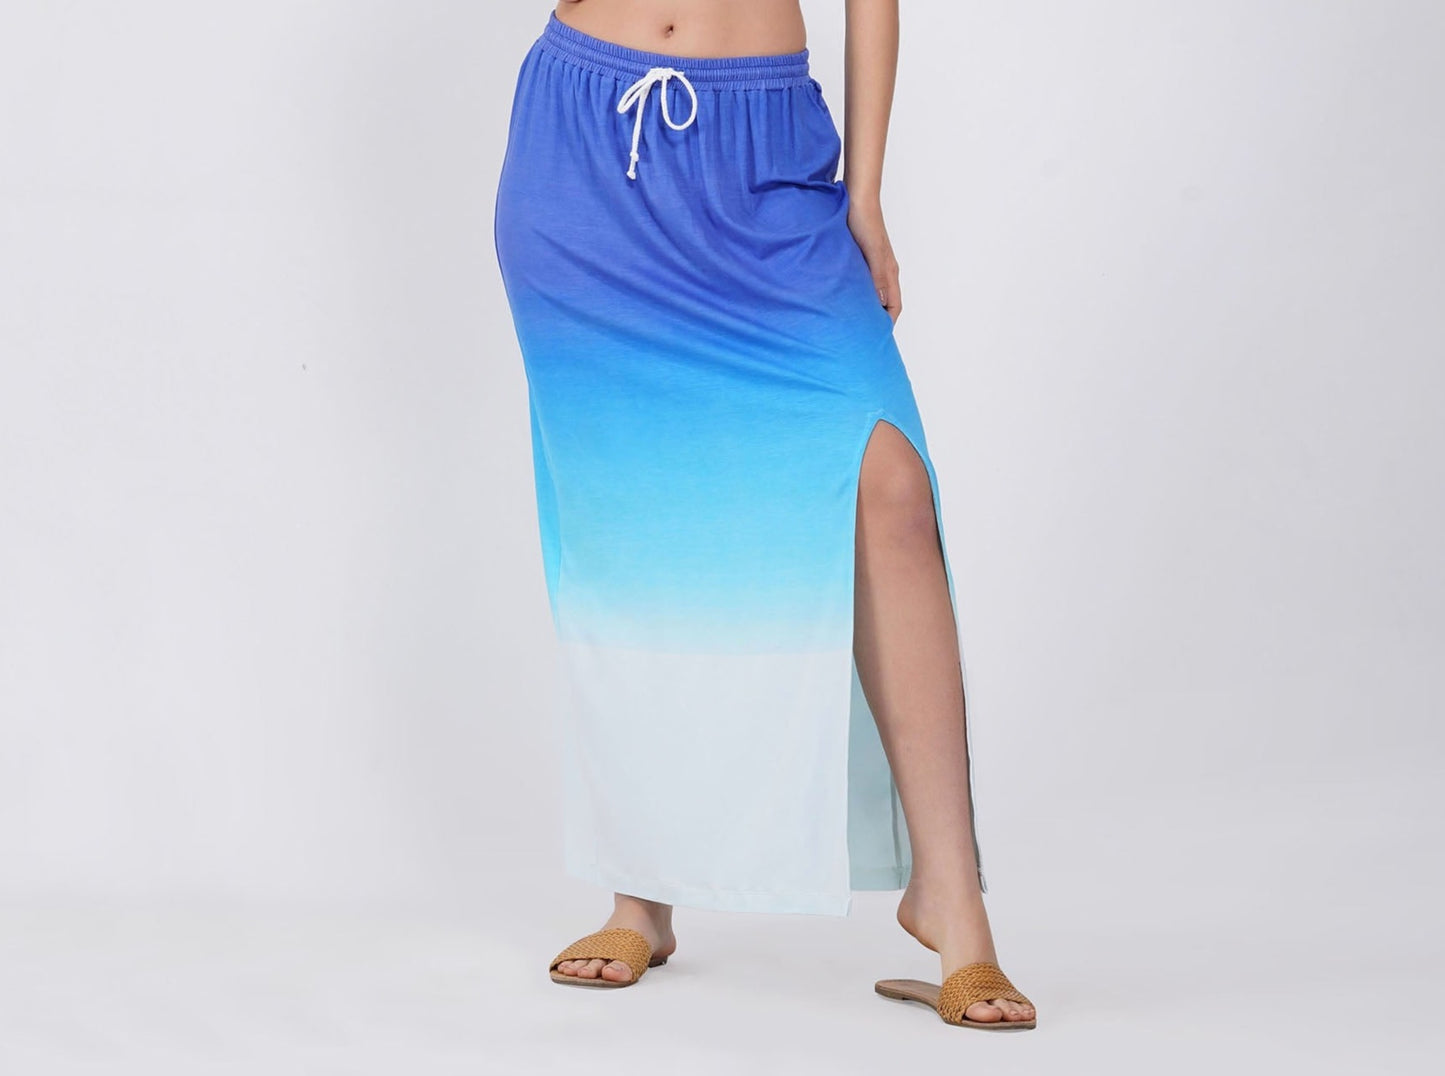 SLAY. Women's Blue to White Ombre Skirt with Slit